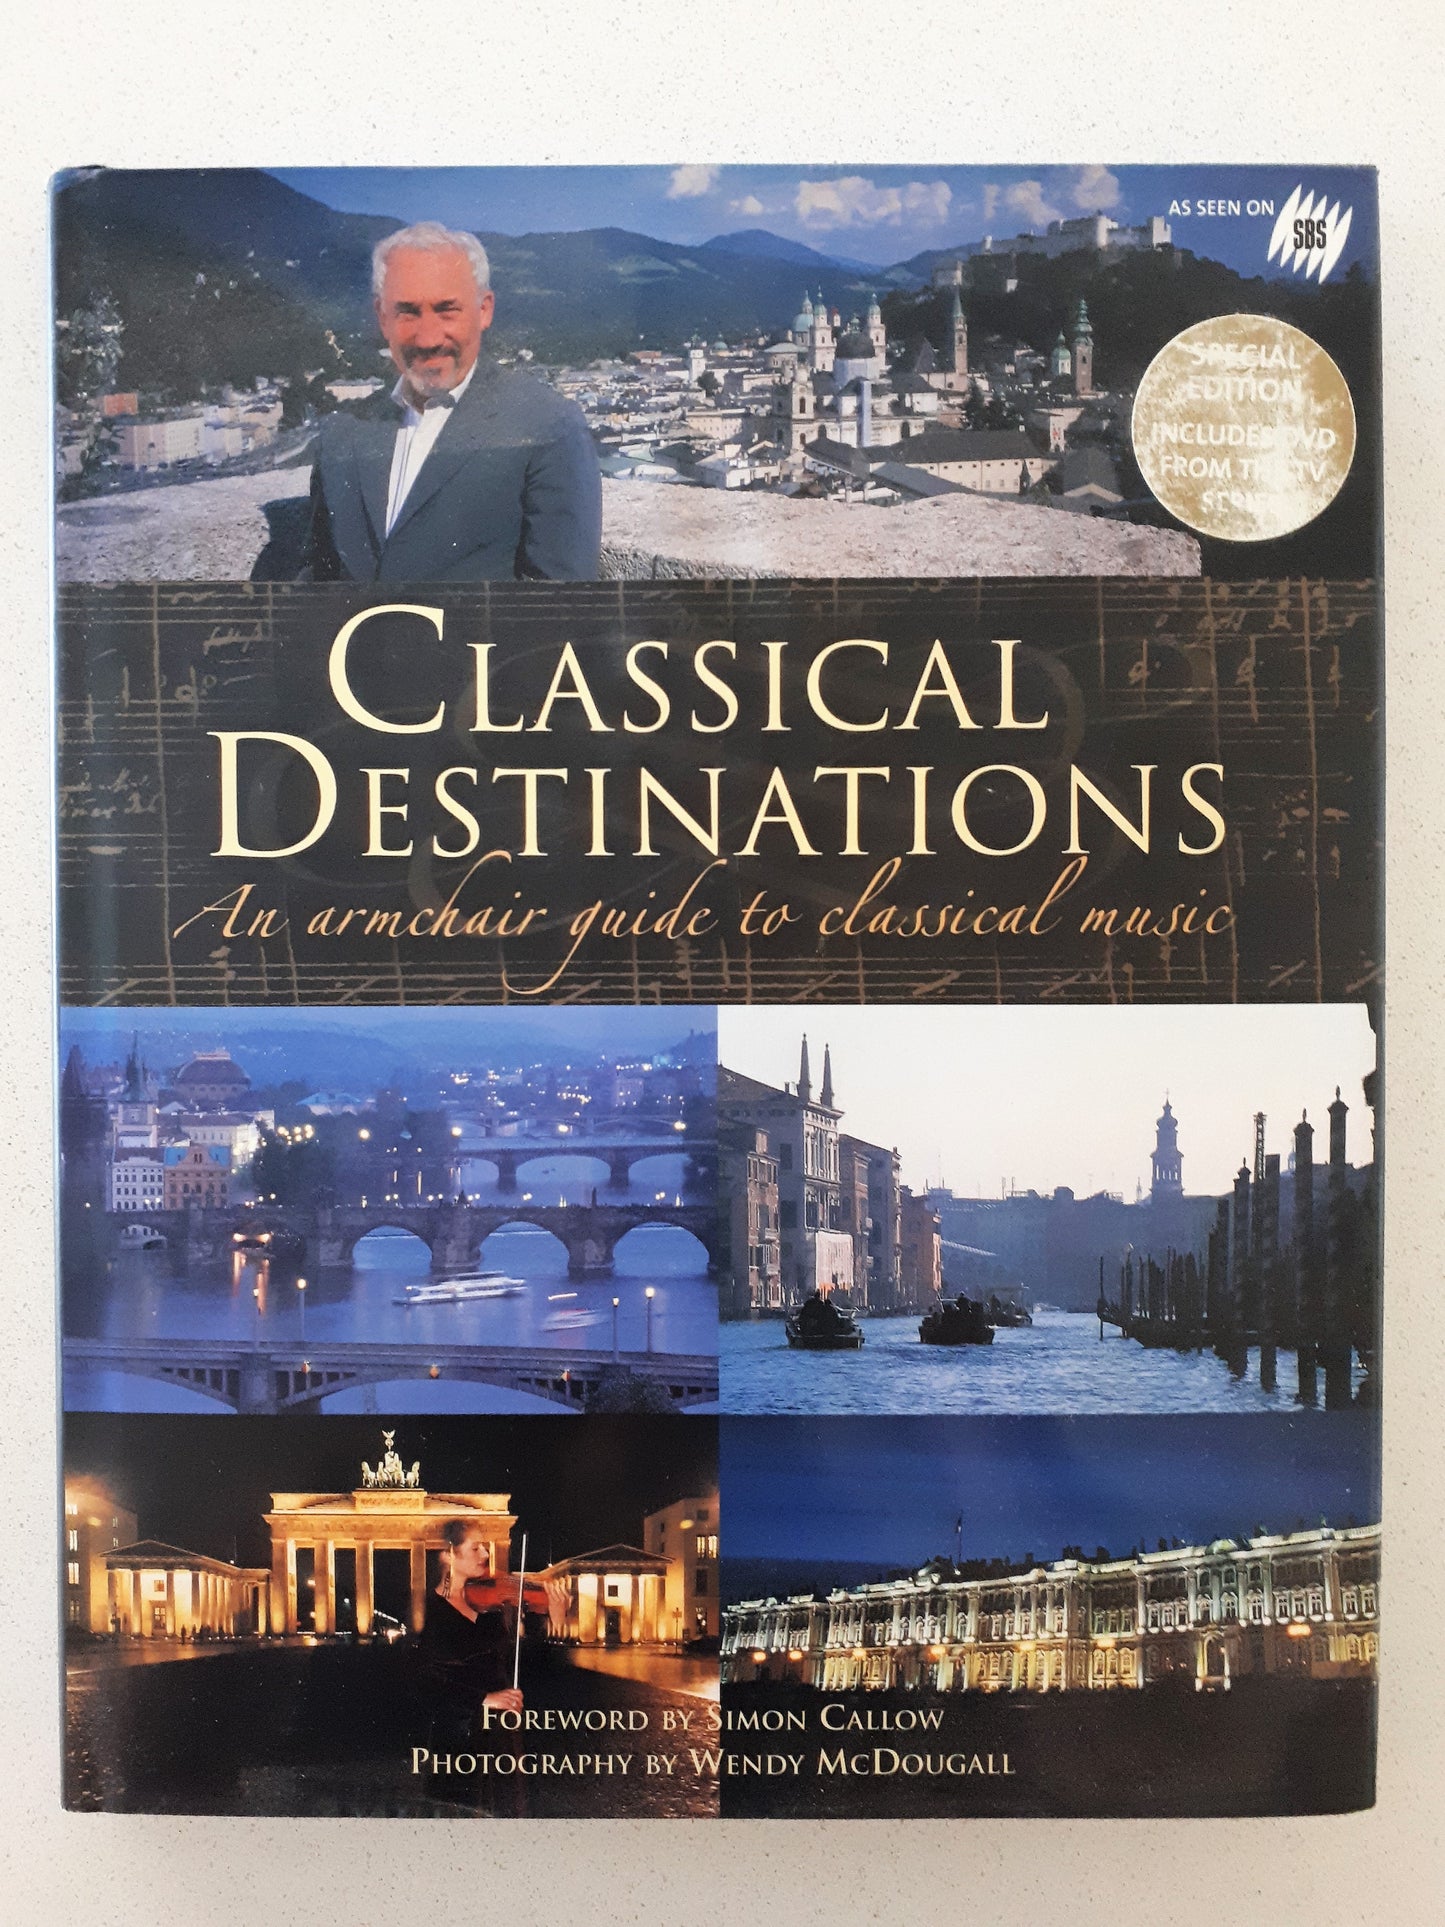 Classical Destinations by Simon Callow and Wendy McDougall (includes sample DVD)